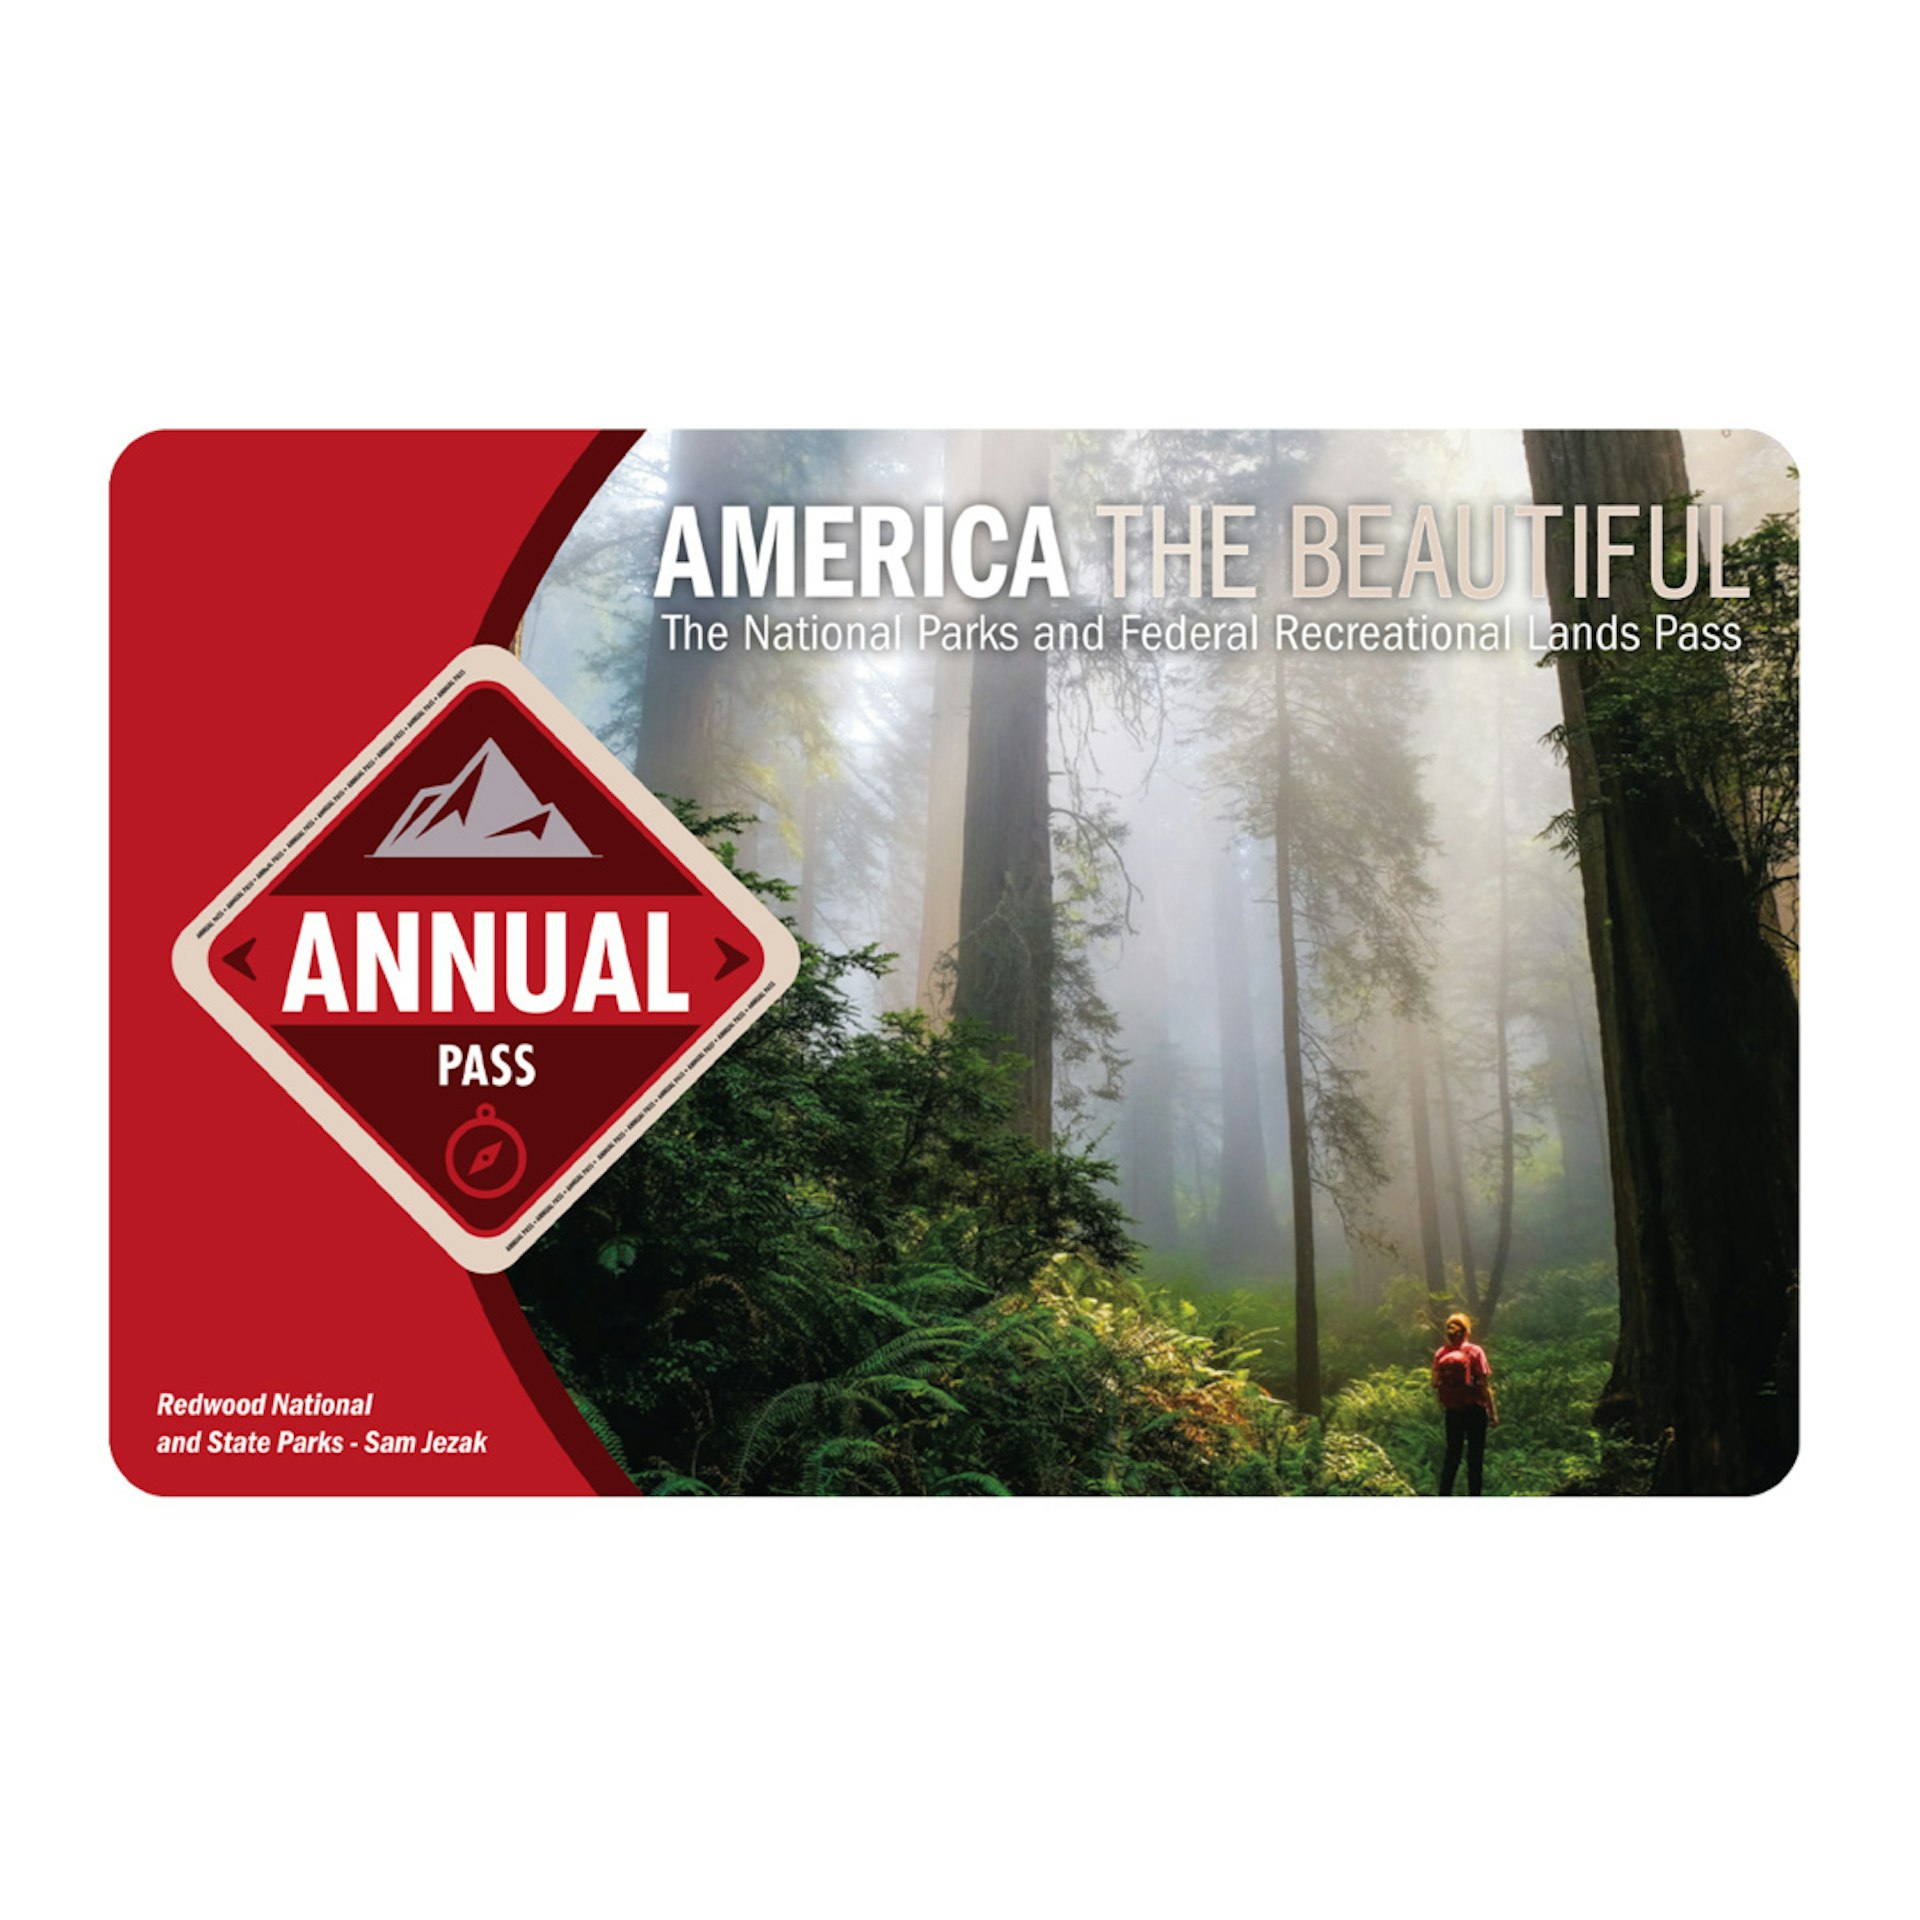 A credit card-sized national parks pass with a waterfall and the words America the Beautiful